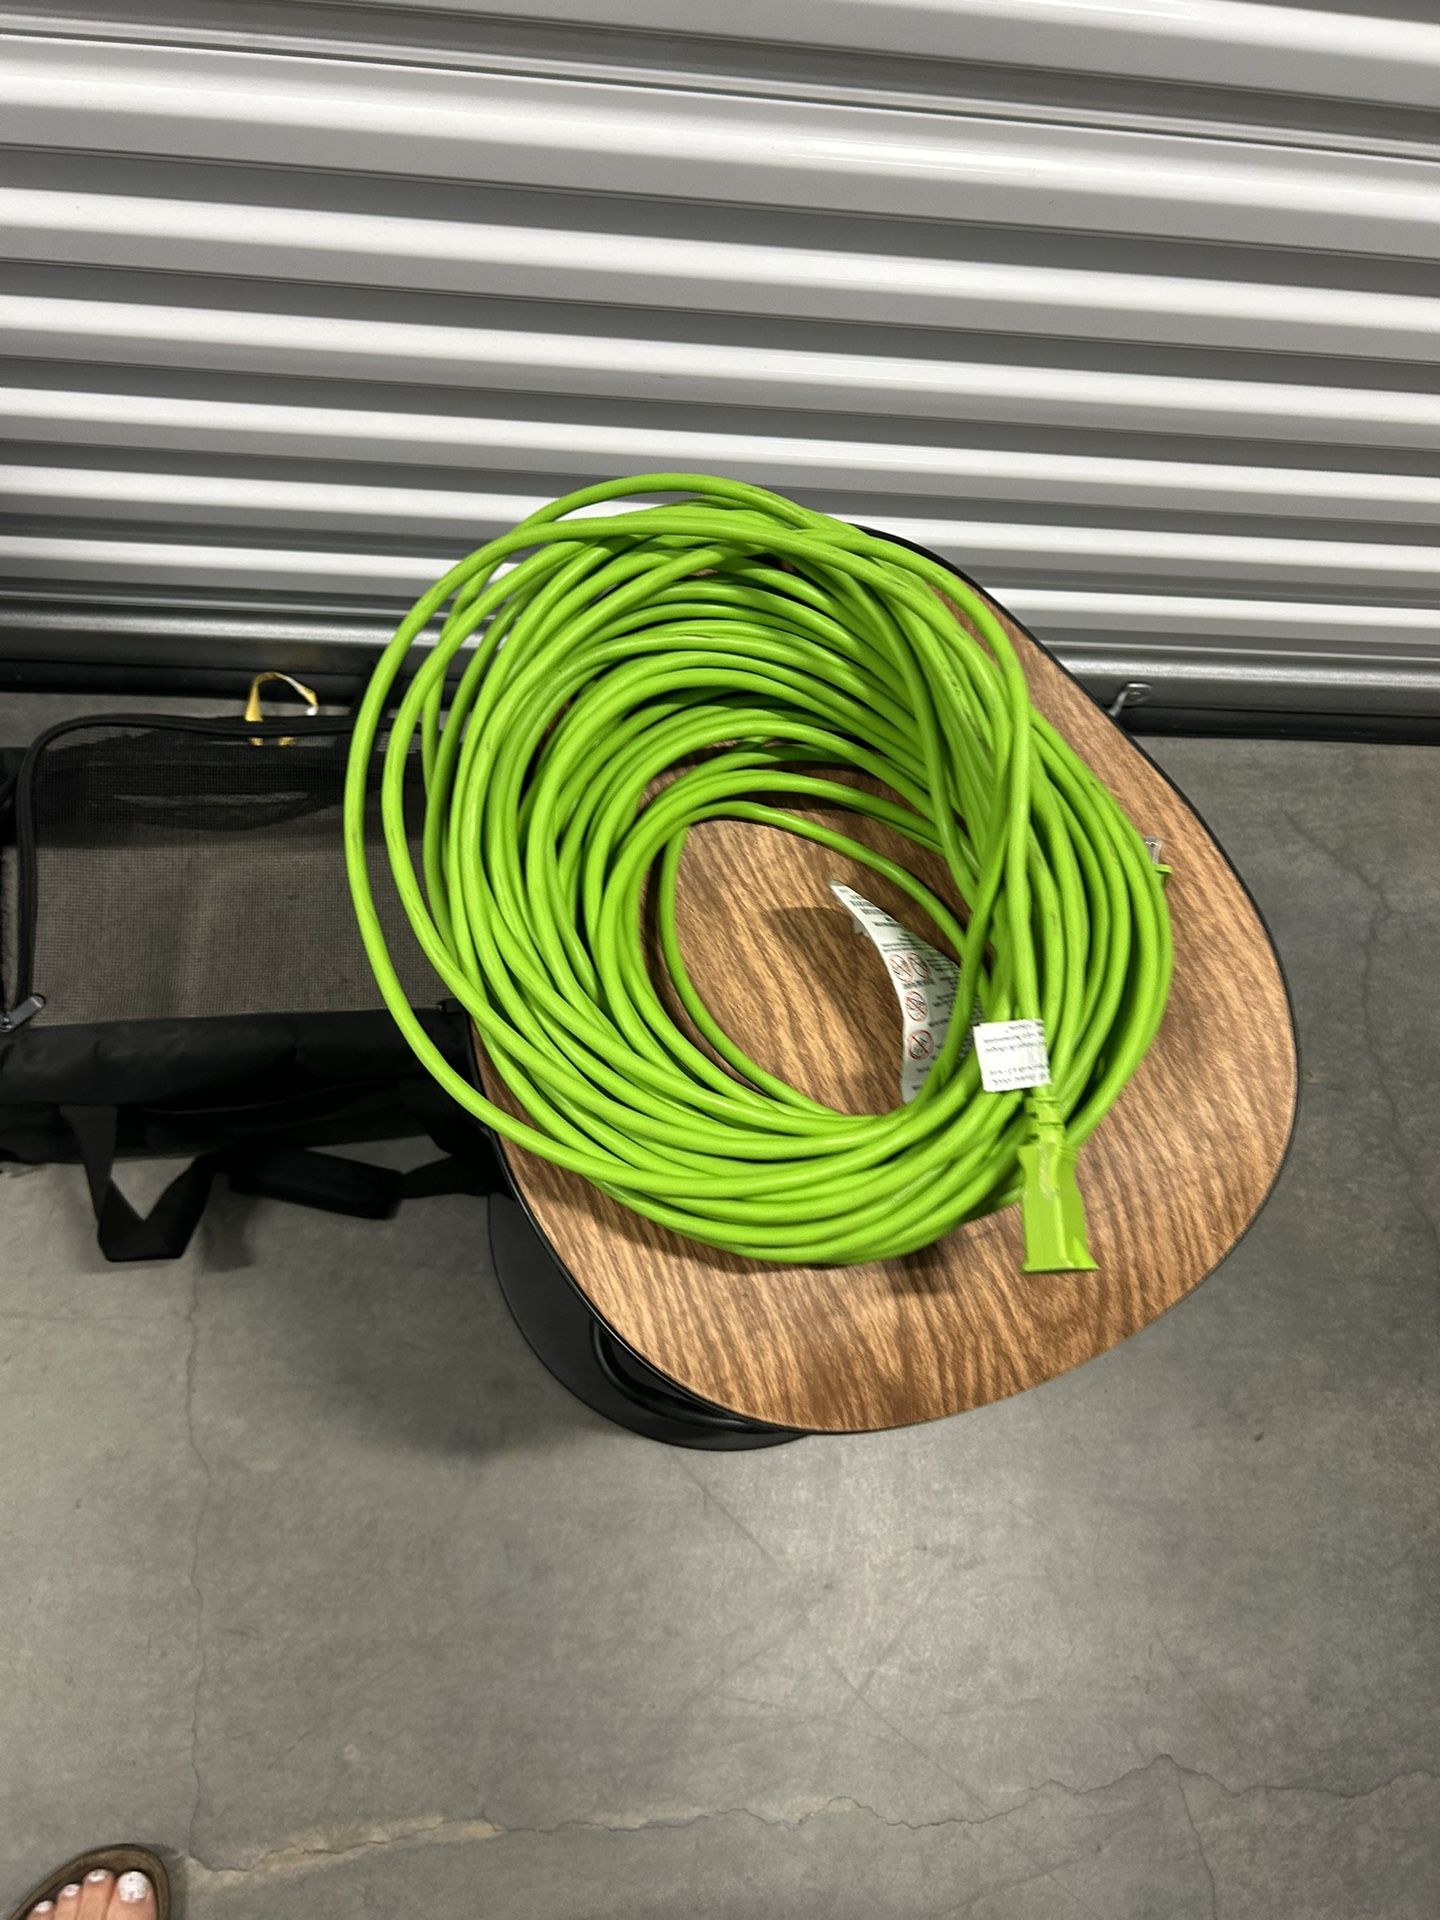 50ft. extension cord